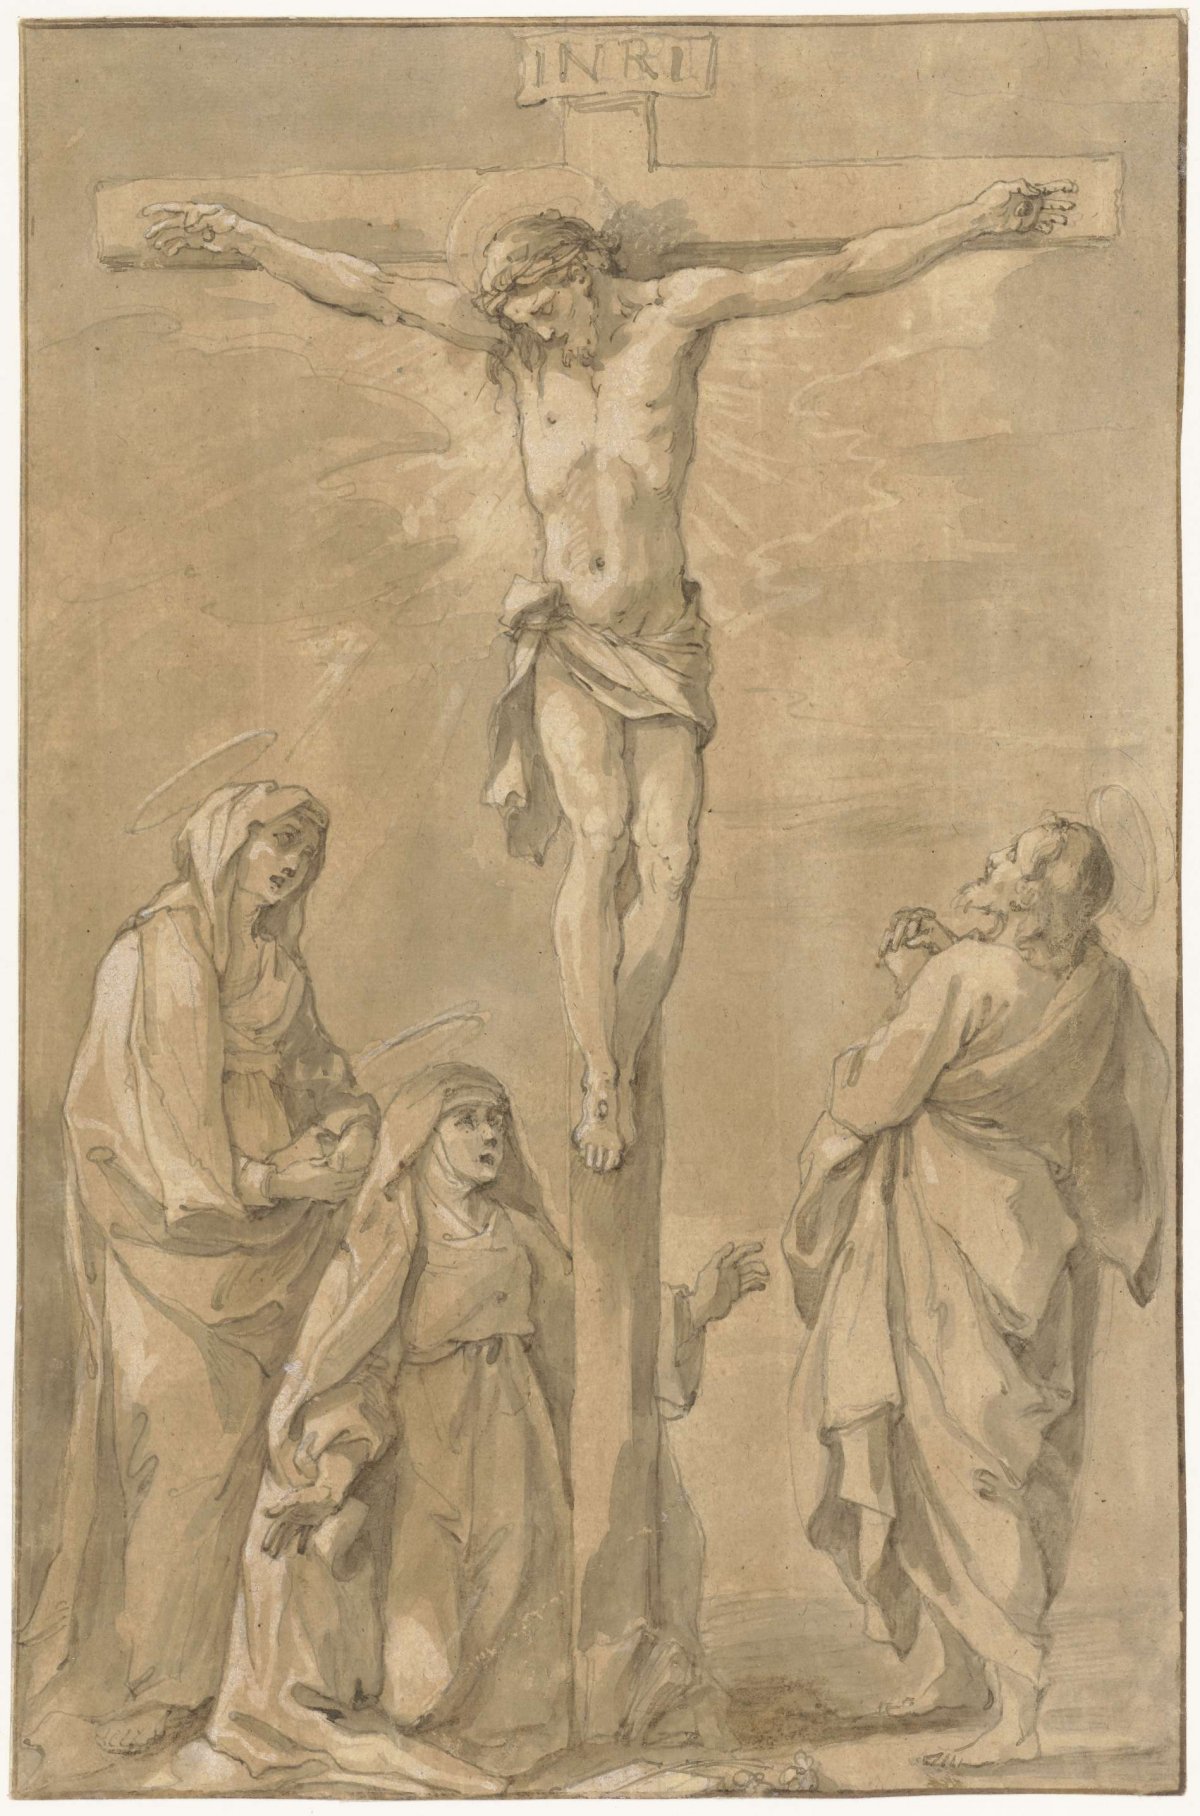 Christ on the cross, with Mary, Catherine of Siena and John, Francesco Vanni, 1590 - 1610